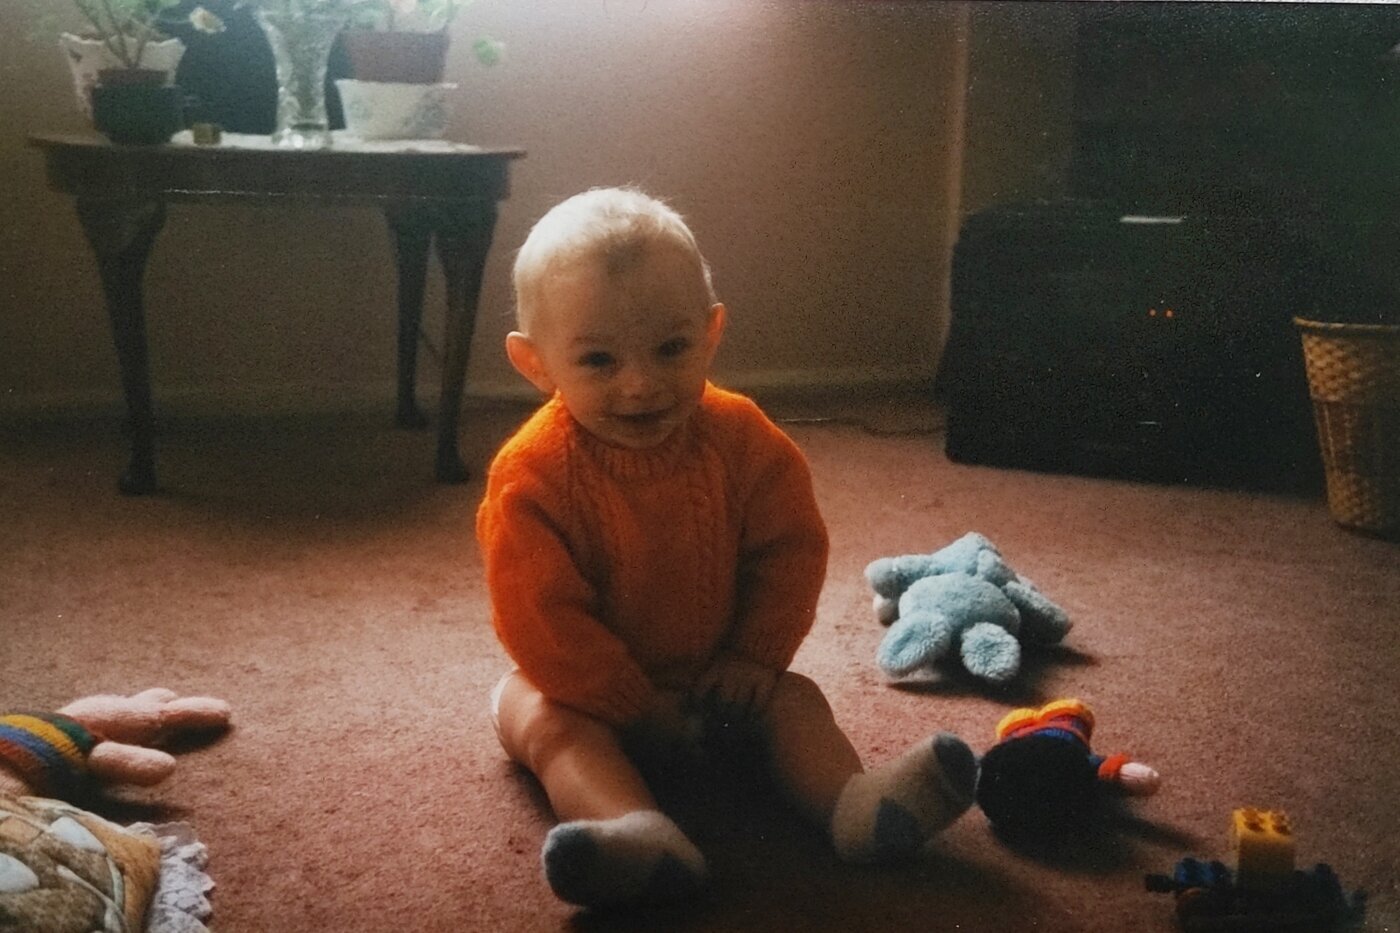 Giz Edwards as a baby, with light shining through his ears